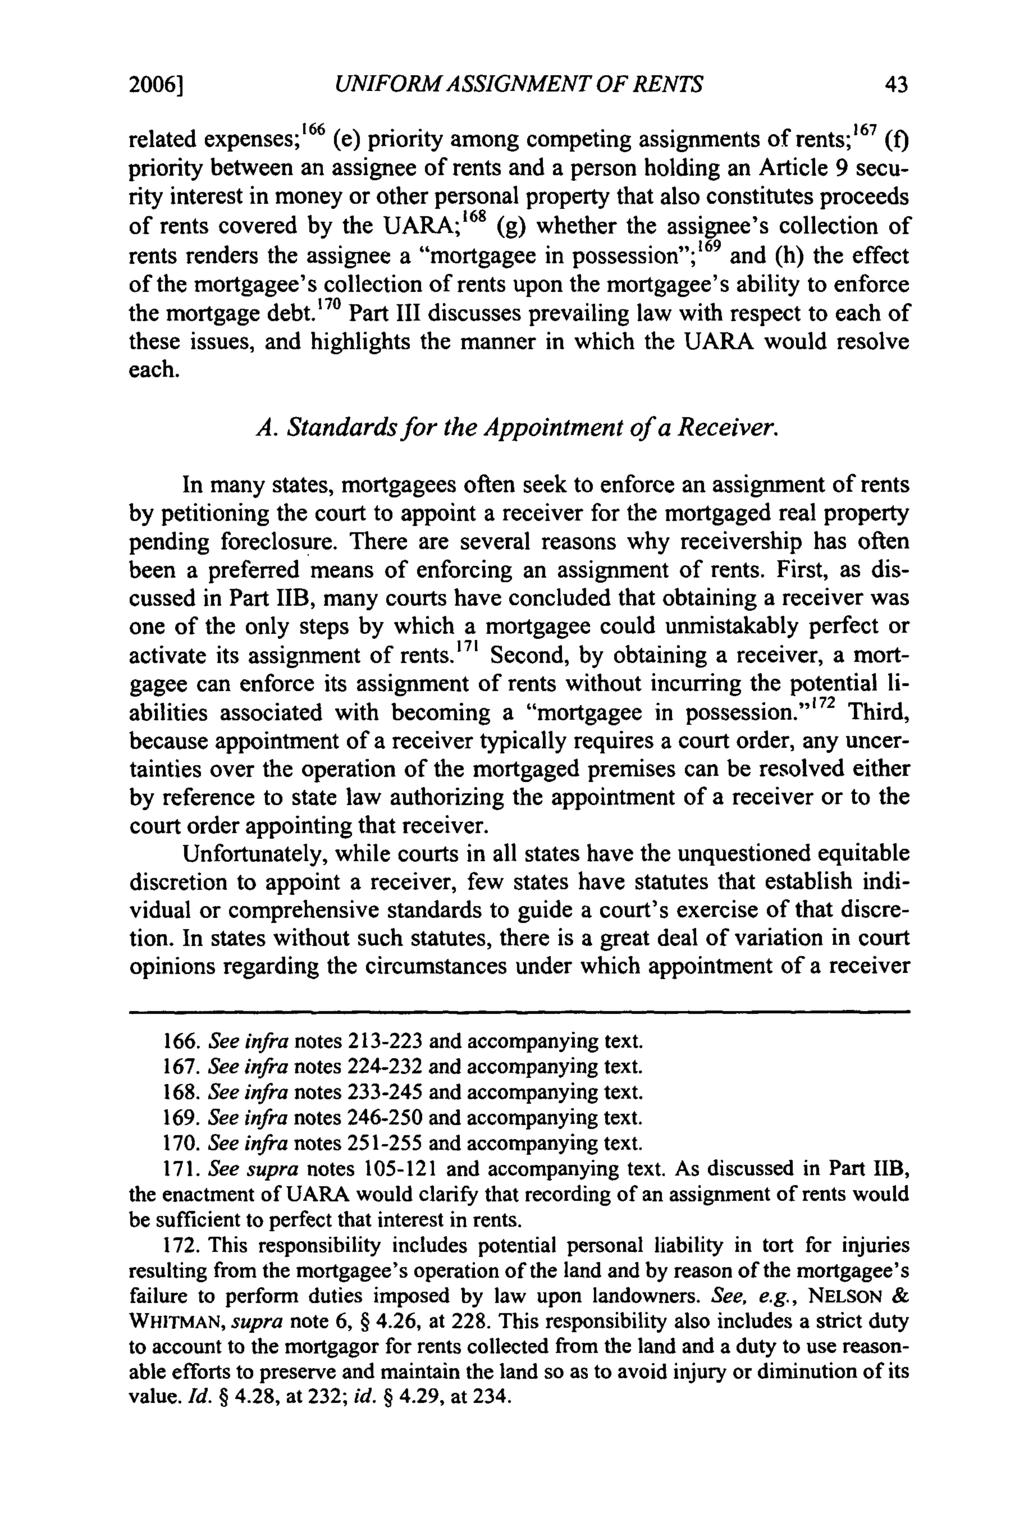 2006] Freyermuth: Freyermuth: Modernizing Security in Rents UNIFORM ASSIGNMENT OF RENTS related expenses;'66 (e) priority among competing assignments of rents;1 67 (f) priority between an assignee of